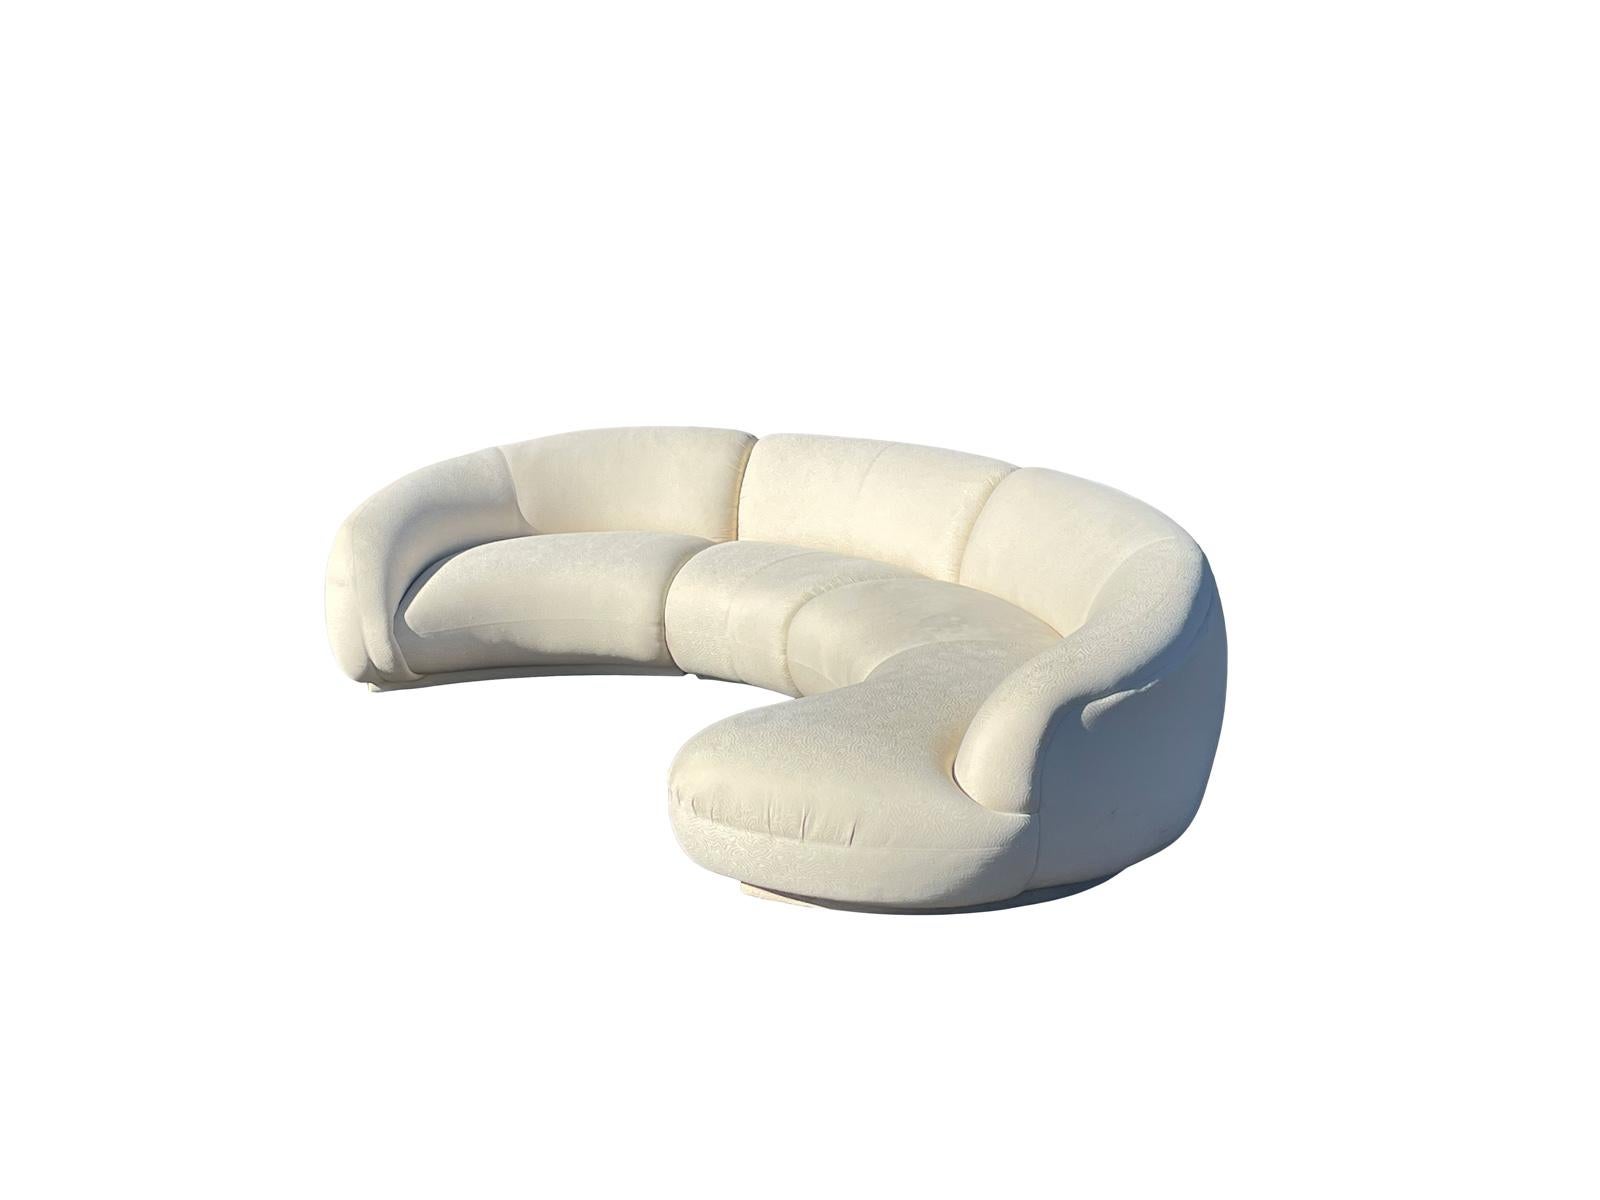 1980s 3-Piece Biomorphic Curved Sofa By Preview  In Good Condition For Sale In Bensalem, PA